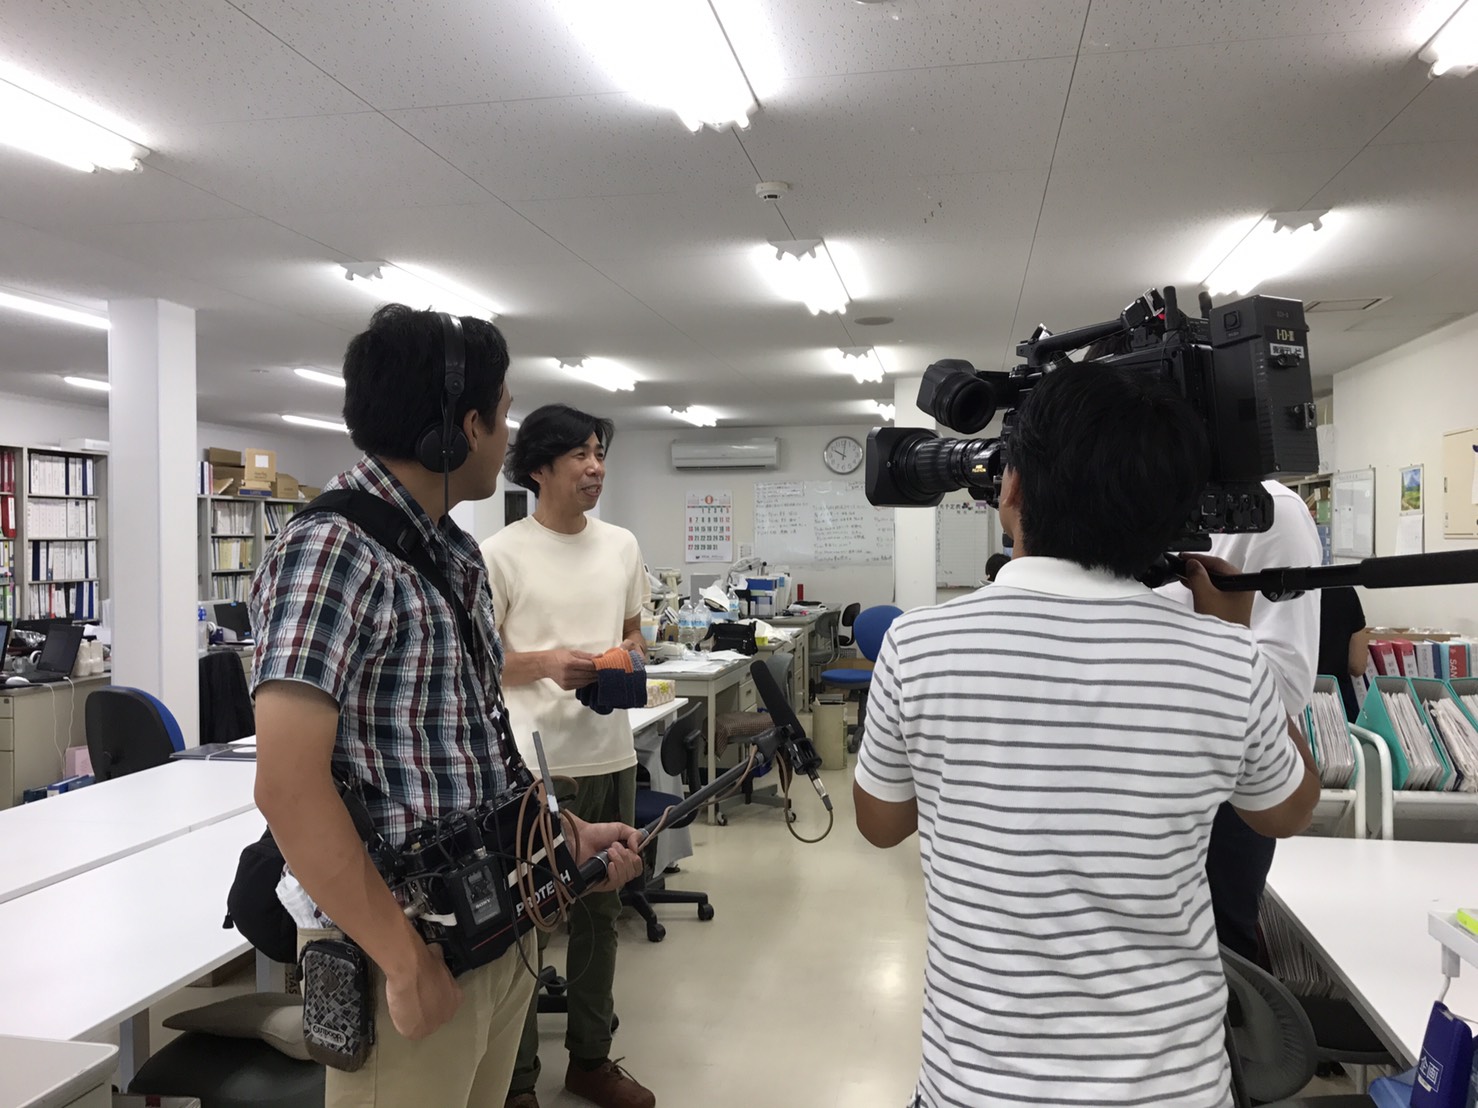 We took TV interview of TOKAI Television 「MINNA NO NEWS」－‘News for everybody’．